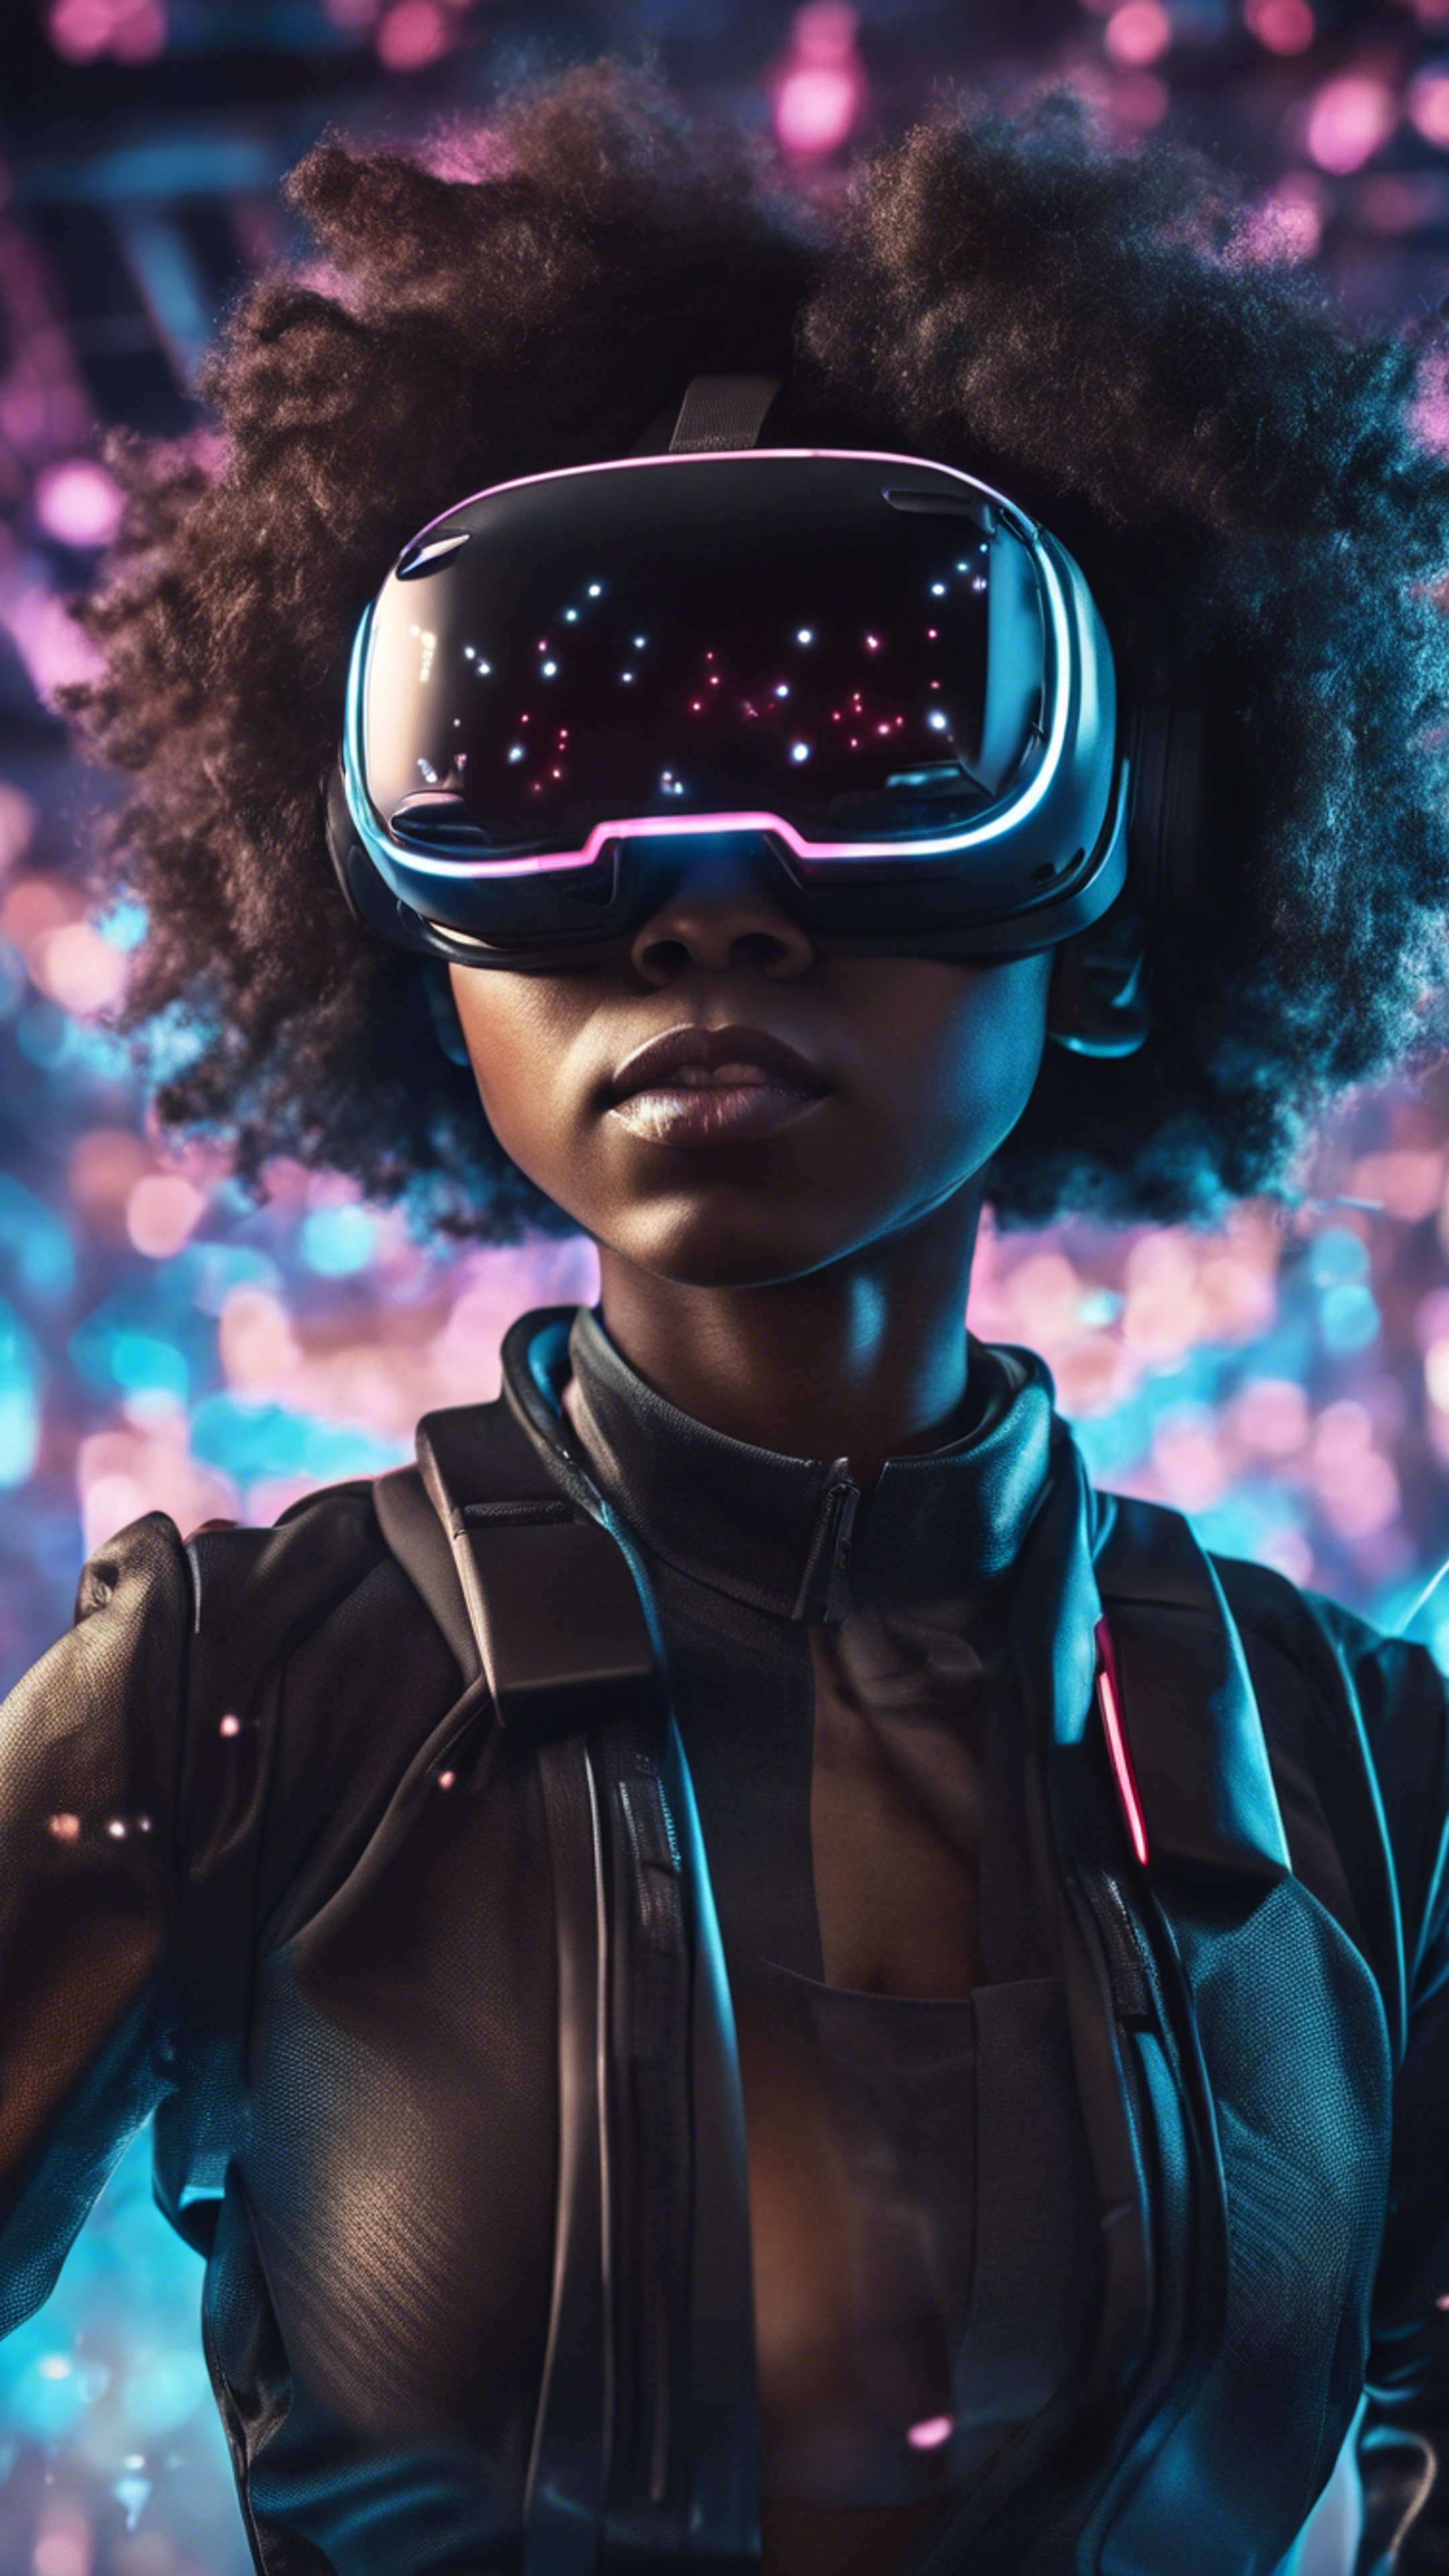 A black girl wearing a virtual reality headset completely immersed in a futuristic cyberspace.壁紙[0f80f55163a8478e8707]